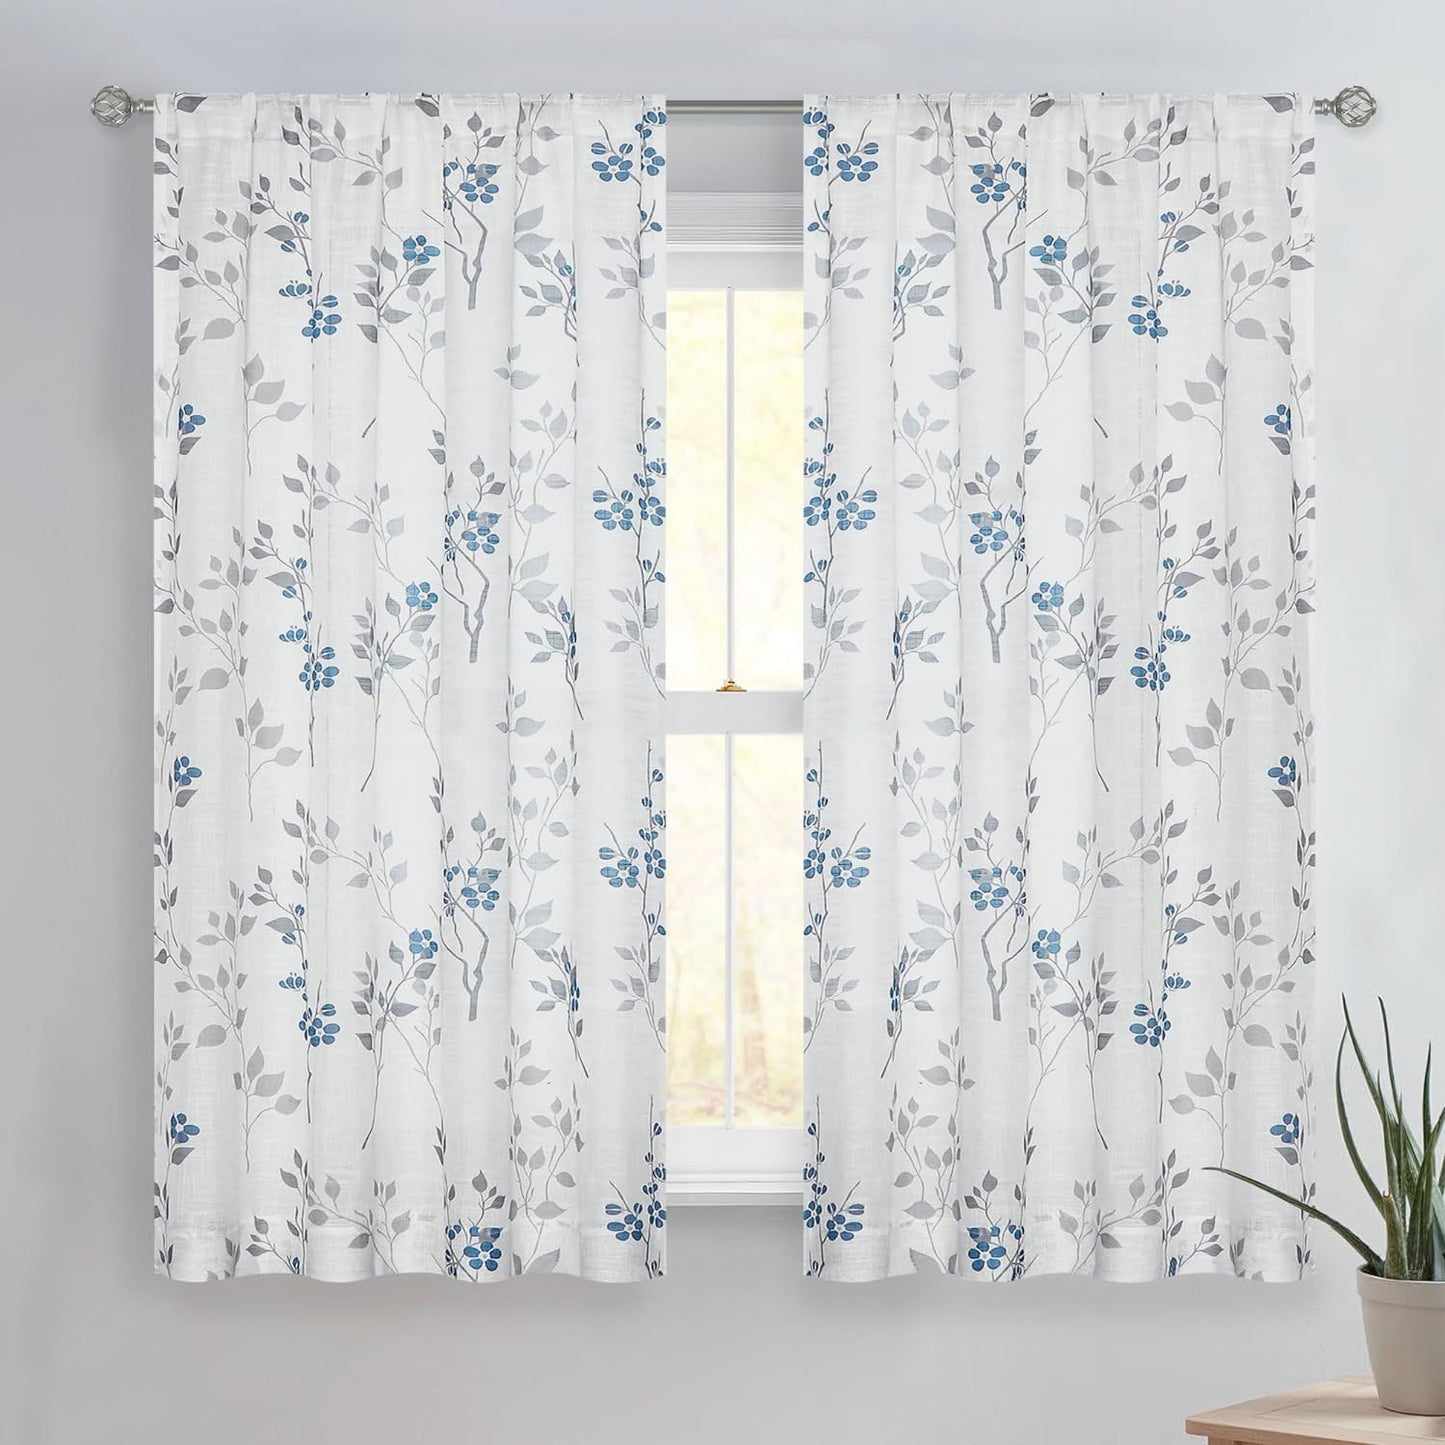 Beauoop Floral Semi Sheer Curtains 84 Inch Long for Living Room Bedroom Farmhouse Botanical Leaf Printed Rustic Linen Texture Panel Drapes Rod Pocket Window Treatment,2 Panels,50 Wide,Yellow/Gray  Beauoop Blue/Gray 50"X54"X2 